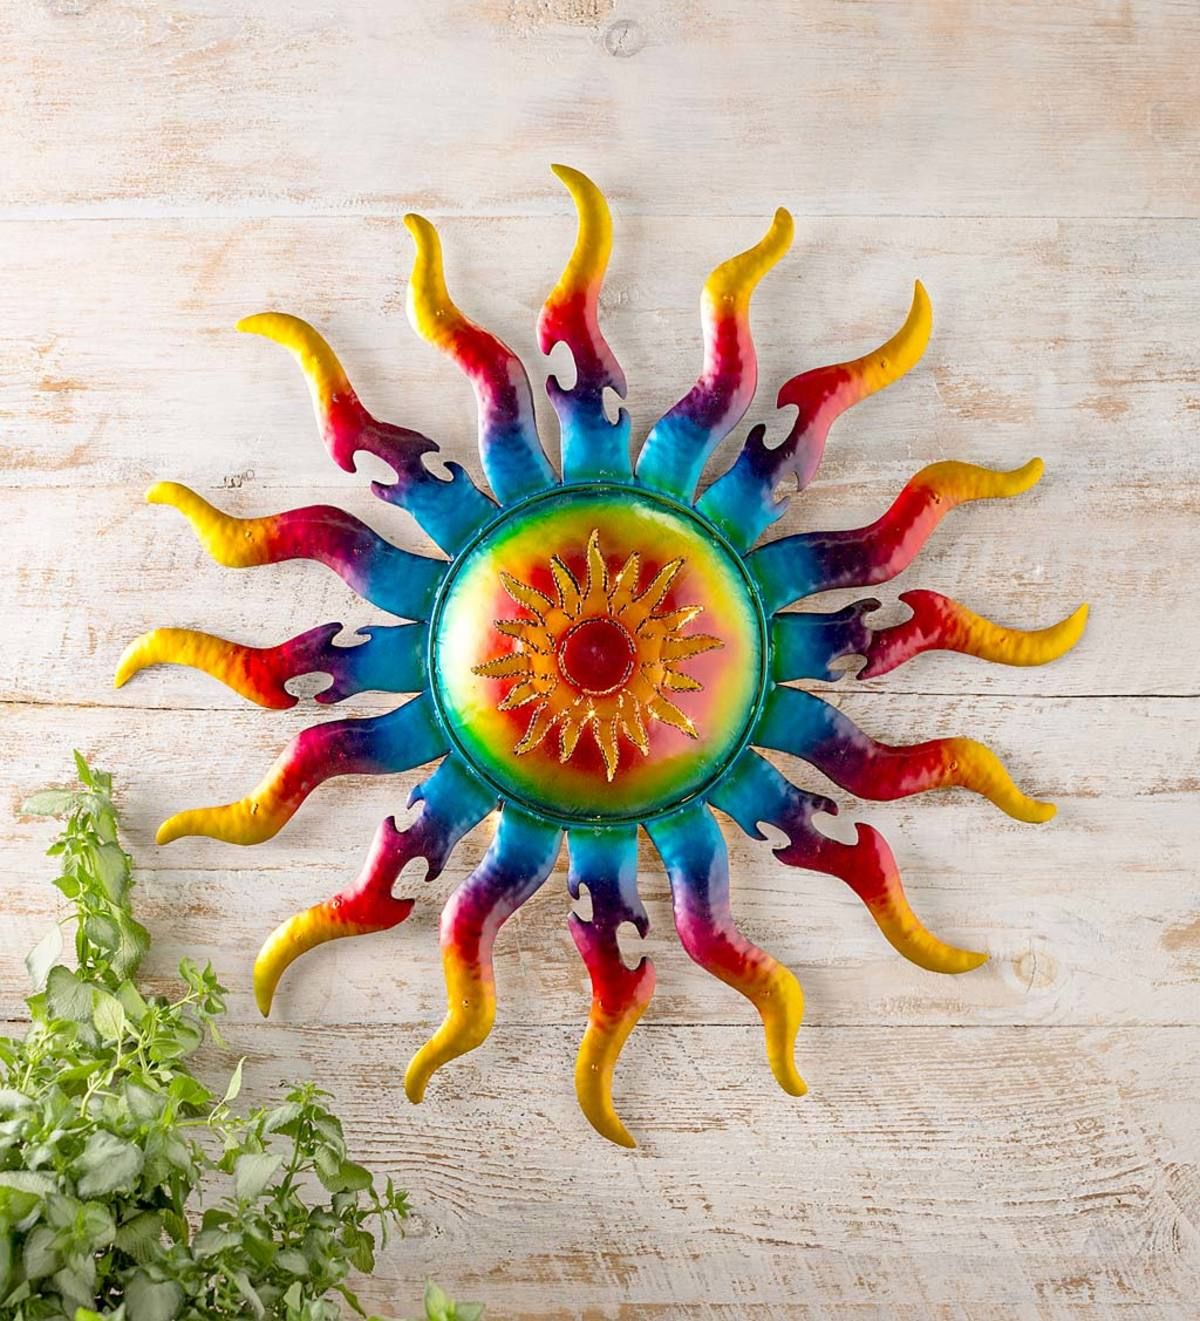 Handcrafted Lighted Metal Sun Wall Art | Wind And Weather For The Sun Wall Art (View 5 of 15)